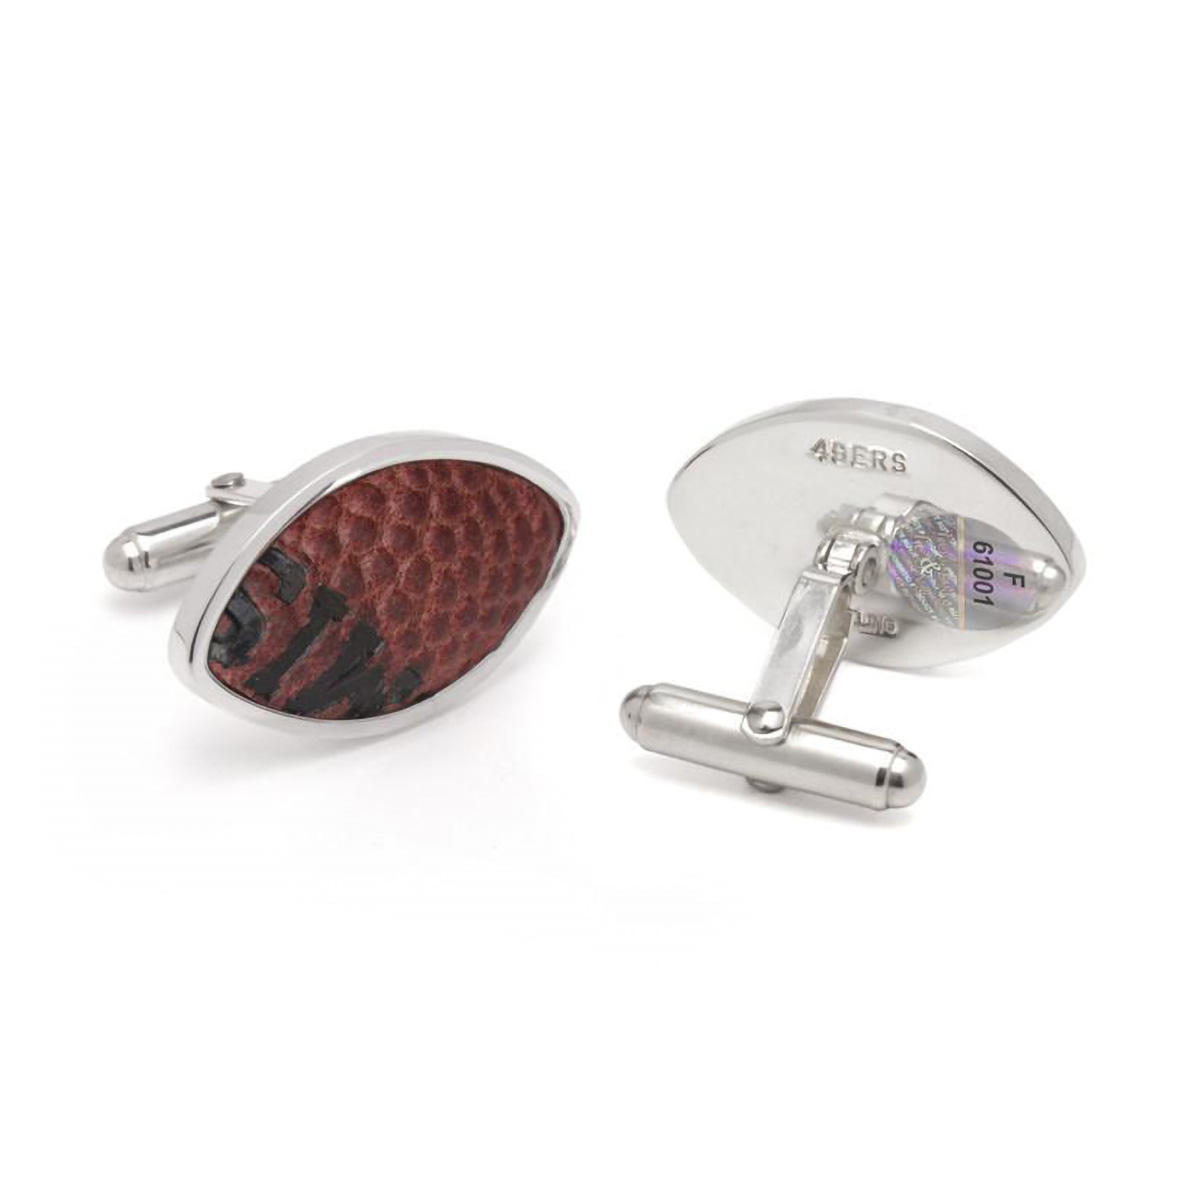 San Francisco 49ers Game used Football Cuff Links in Brown - Cufflinks Depot